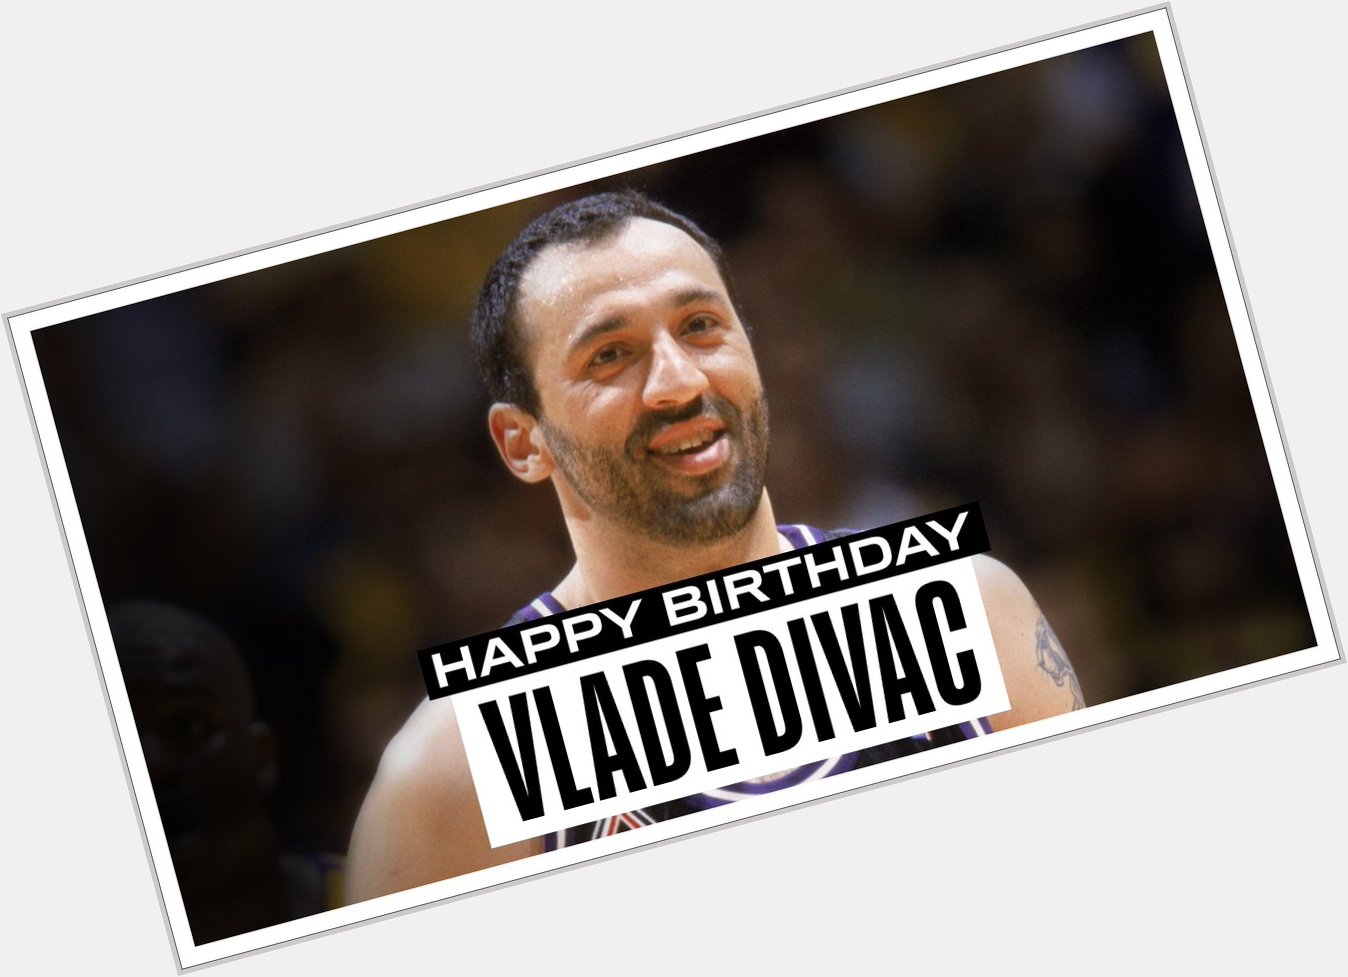 Join us in wishing a Happy 52nd Birthday to 2019 inductee, Vlade Divac. 